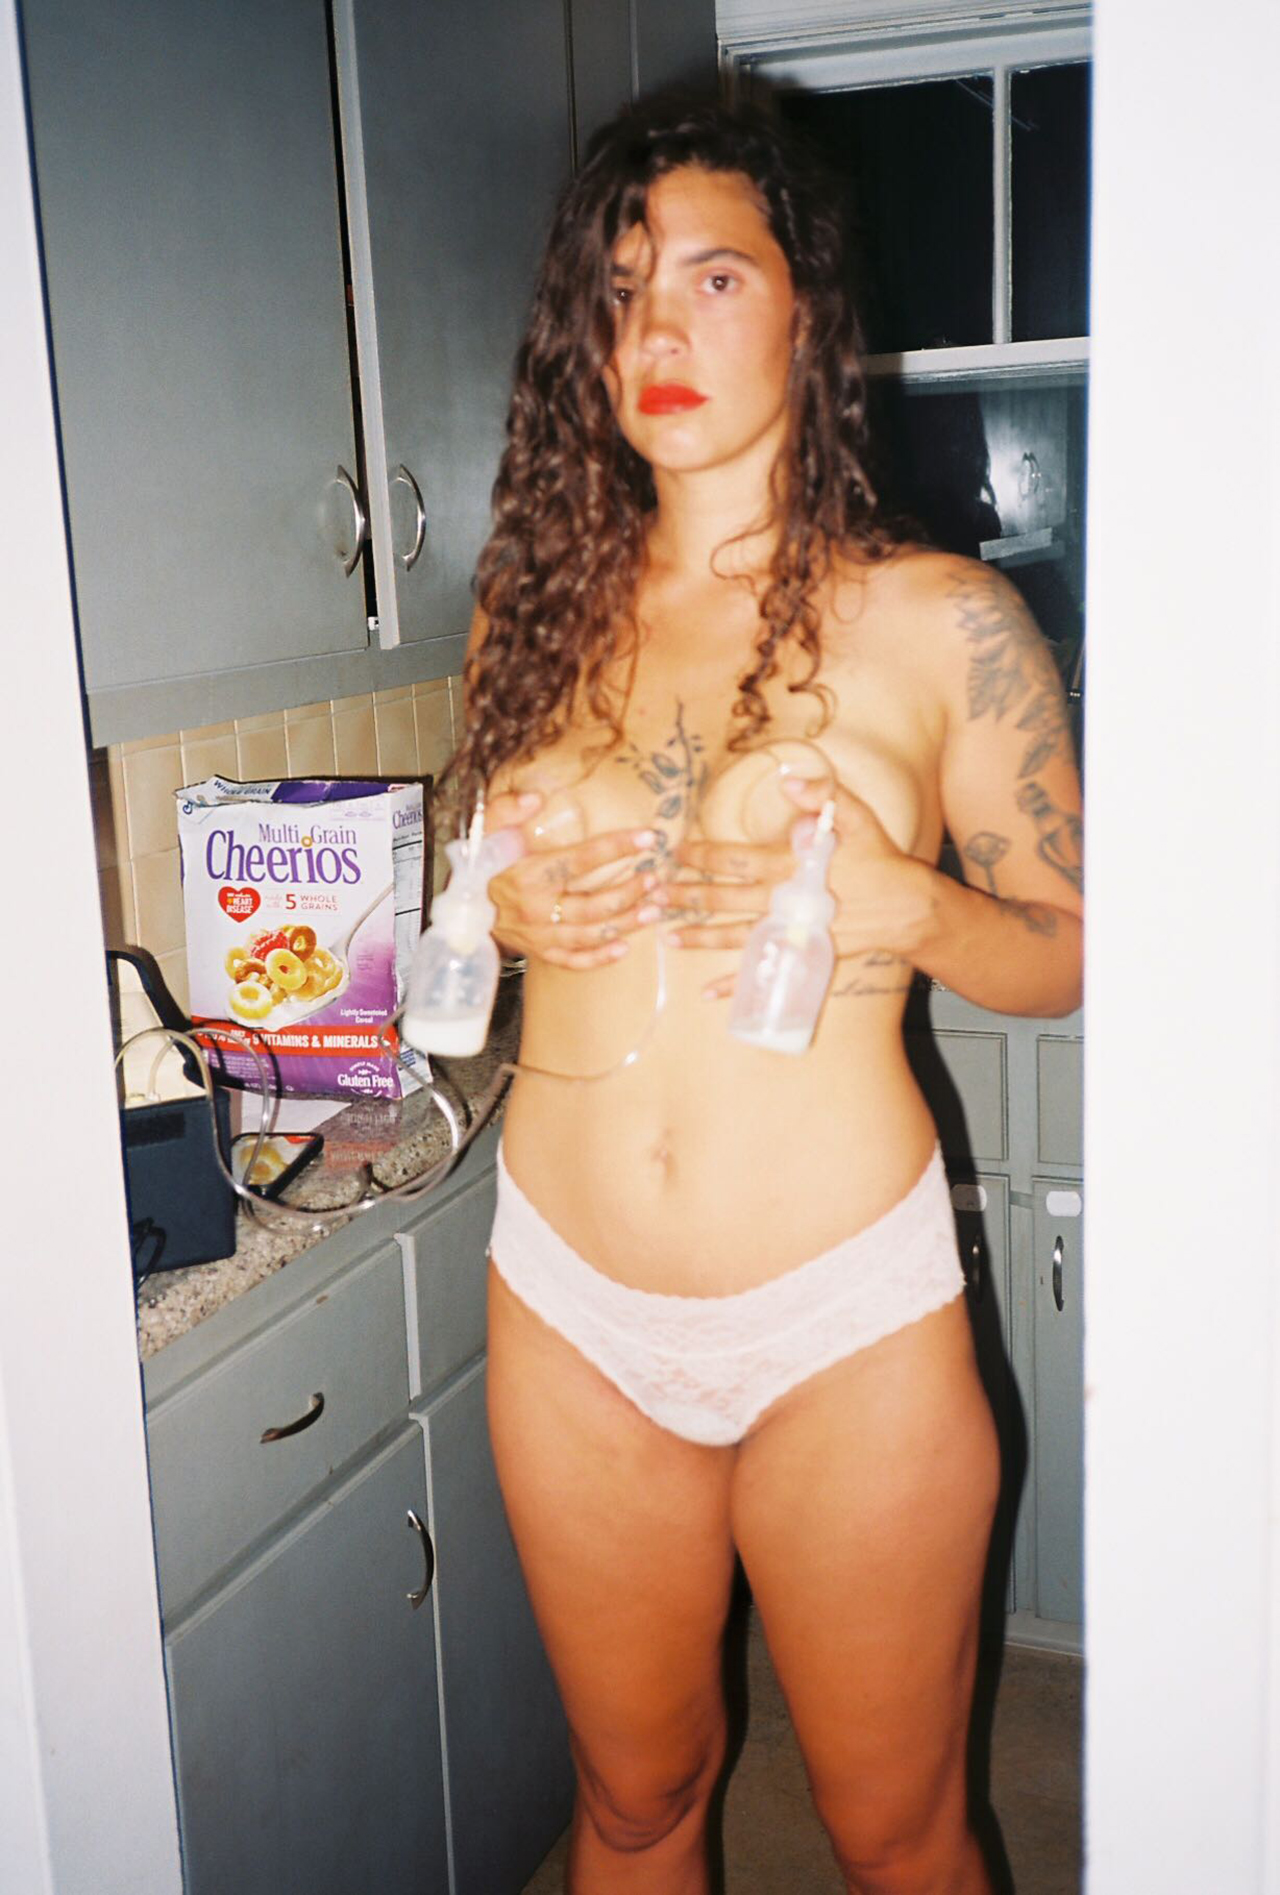 a woman stands in her kitchen pumping breastmilk with a box of cheerios in the background from the life after birth coffee table book about the postpartum experience